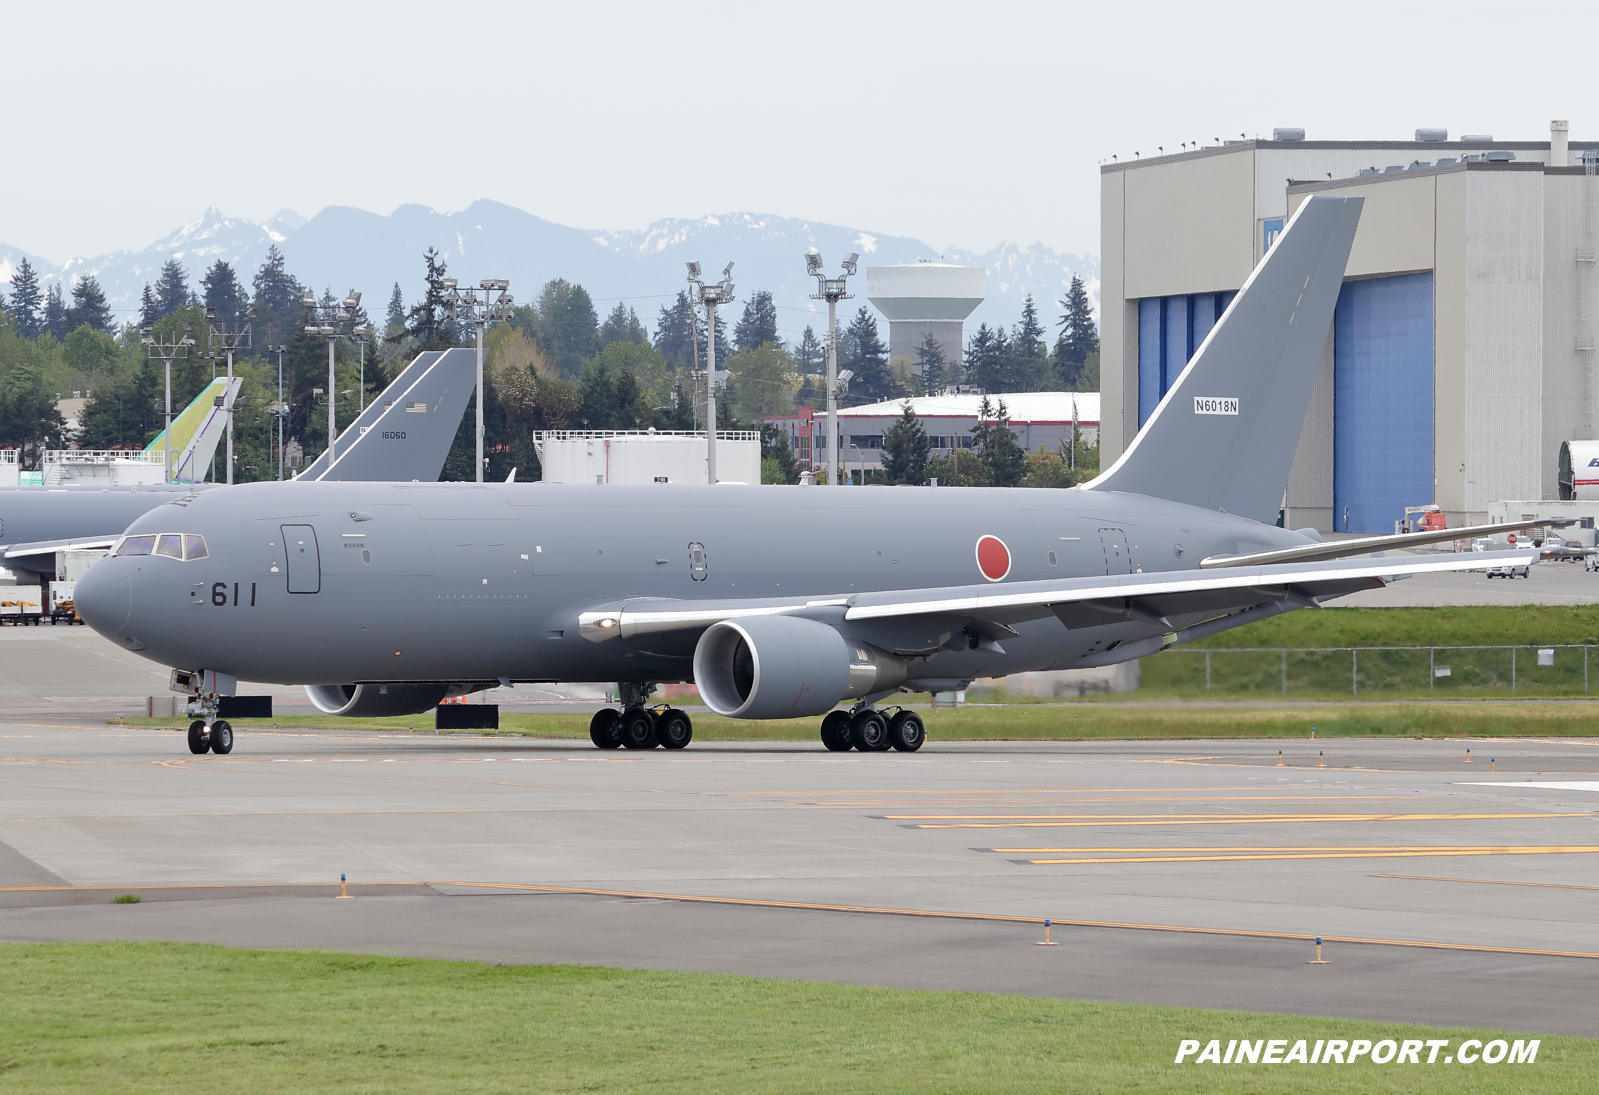 JASDF KC-46A 14-3611 at KPAE Paine Field